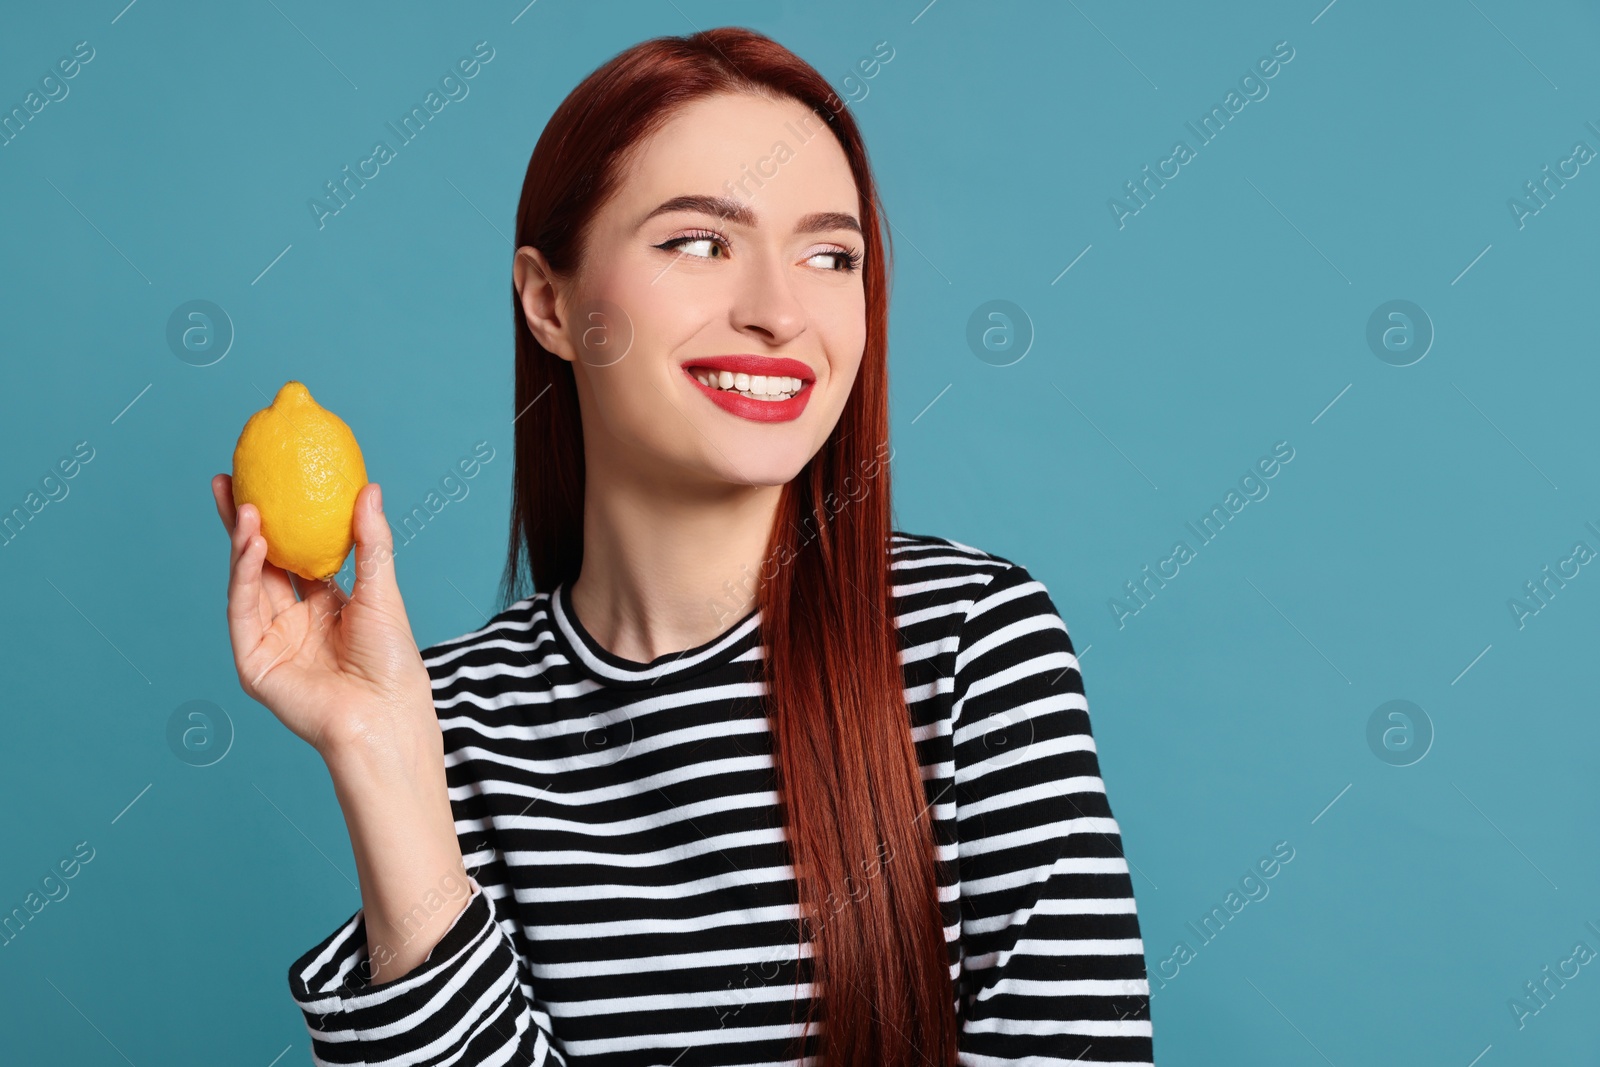 Photo of Happy woman with red dyed hair holding whole lemon on light blue background